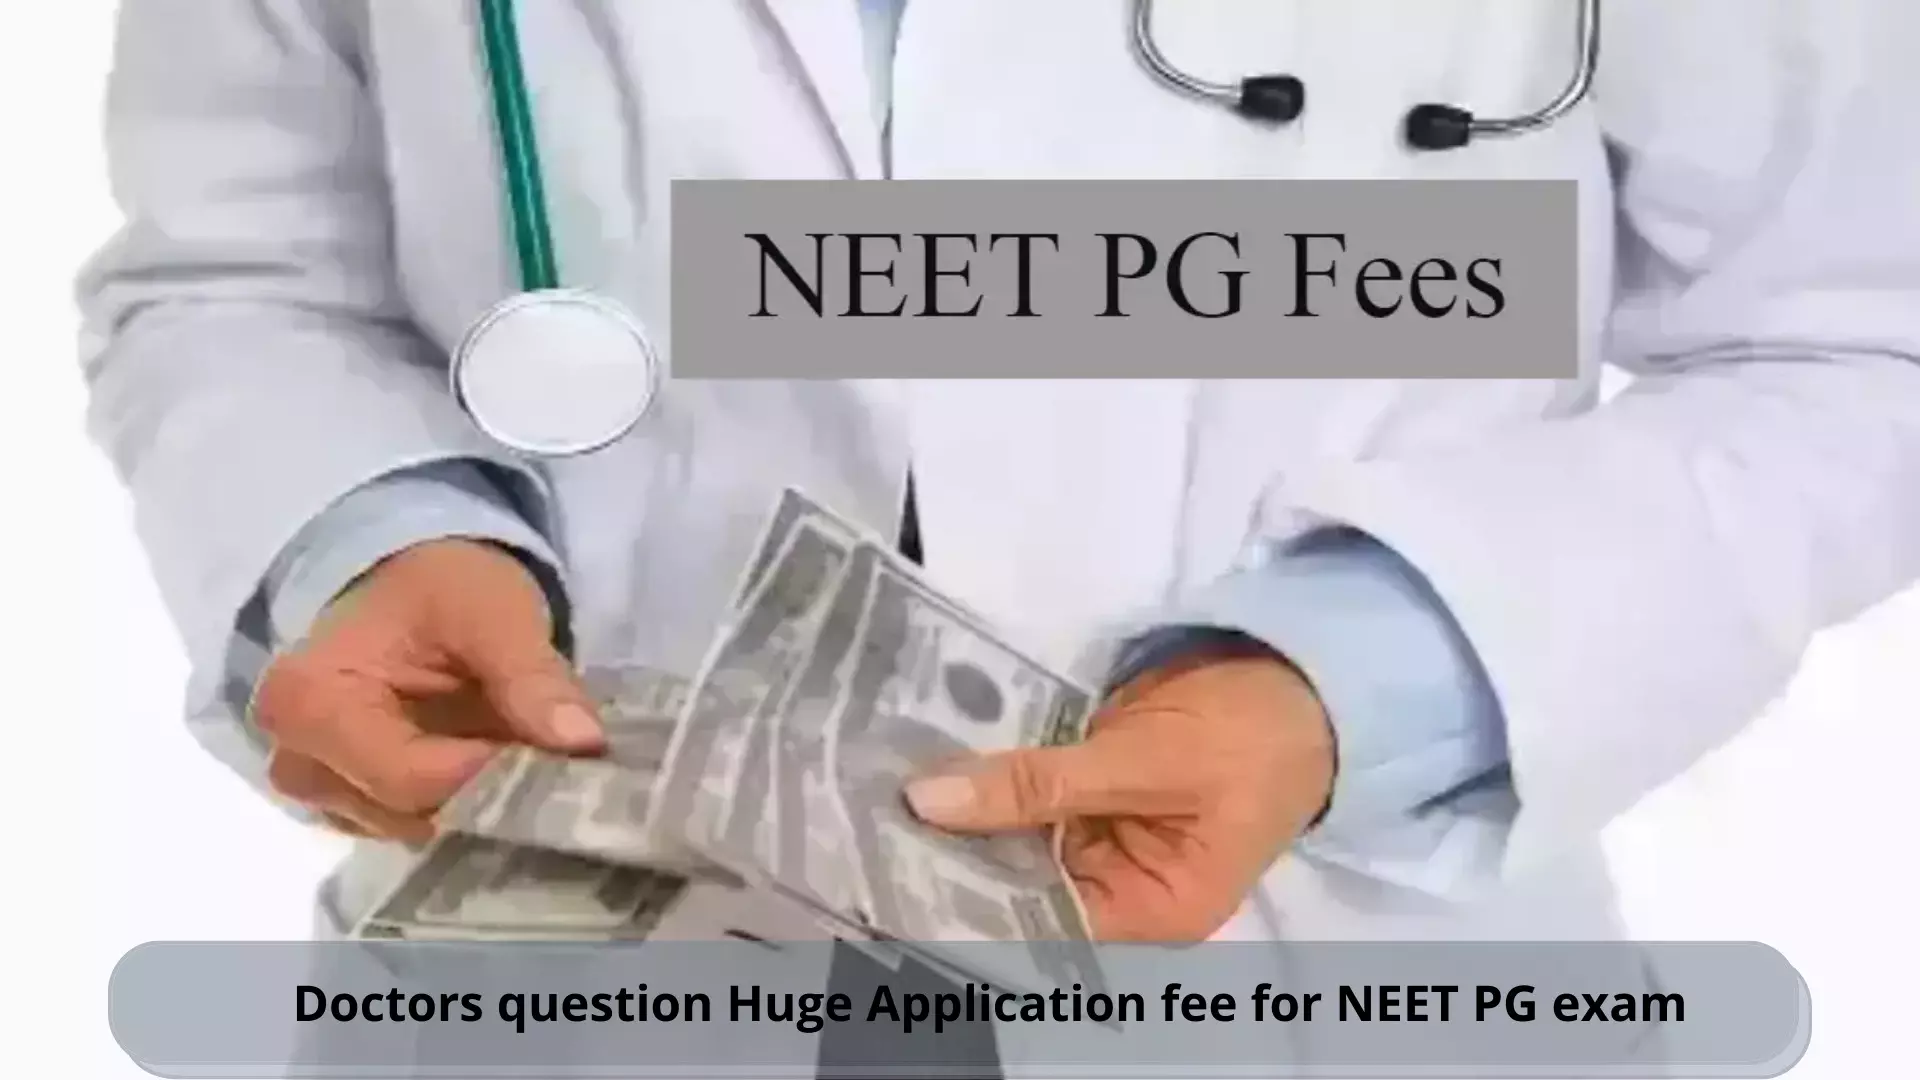 Doctors question huge application fee for NEET PG exam